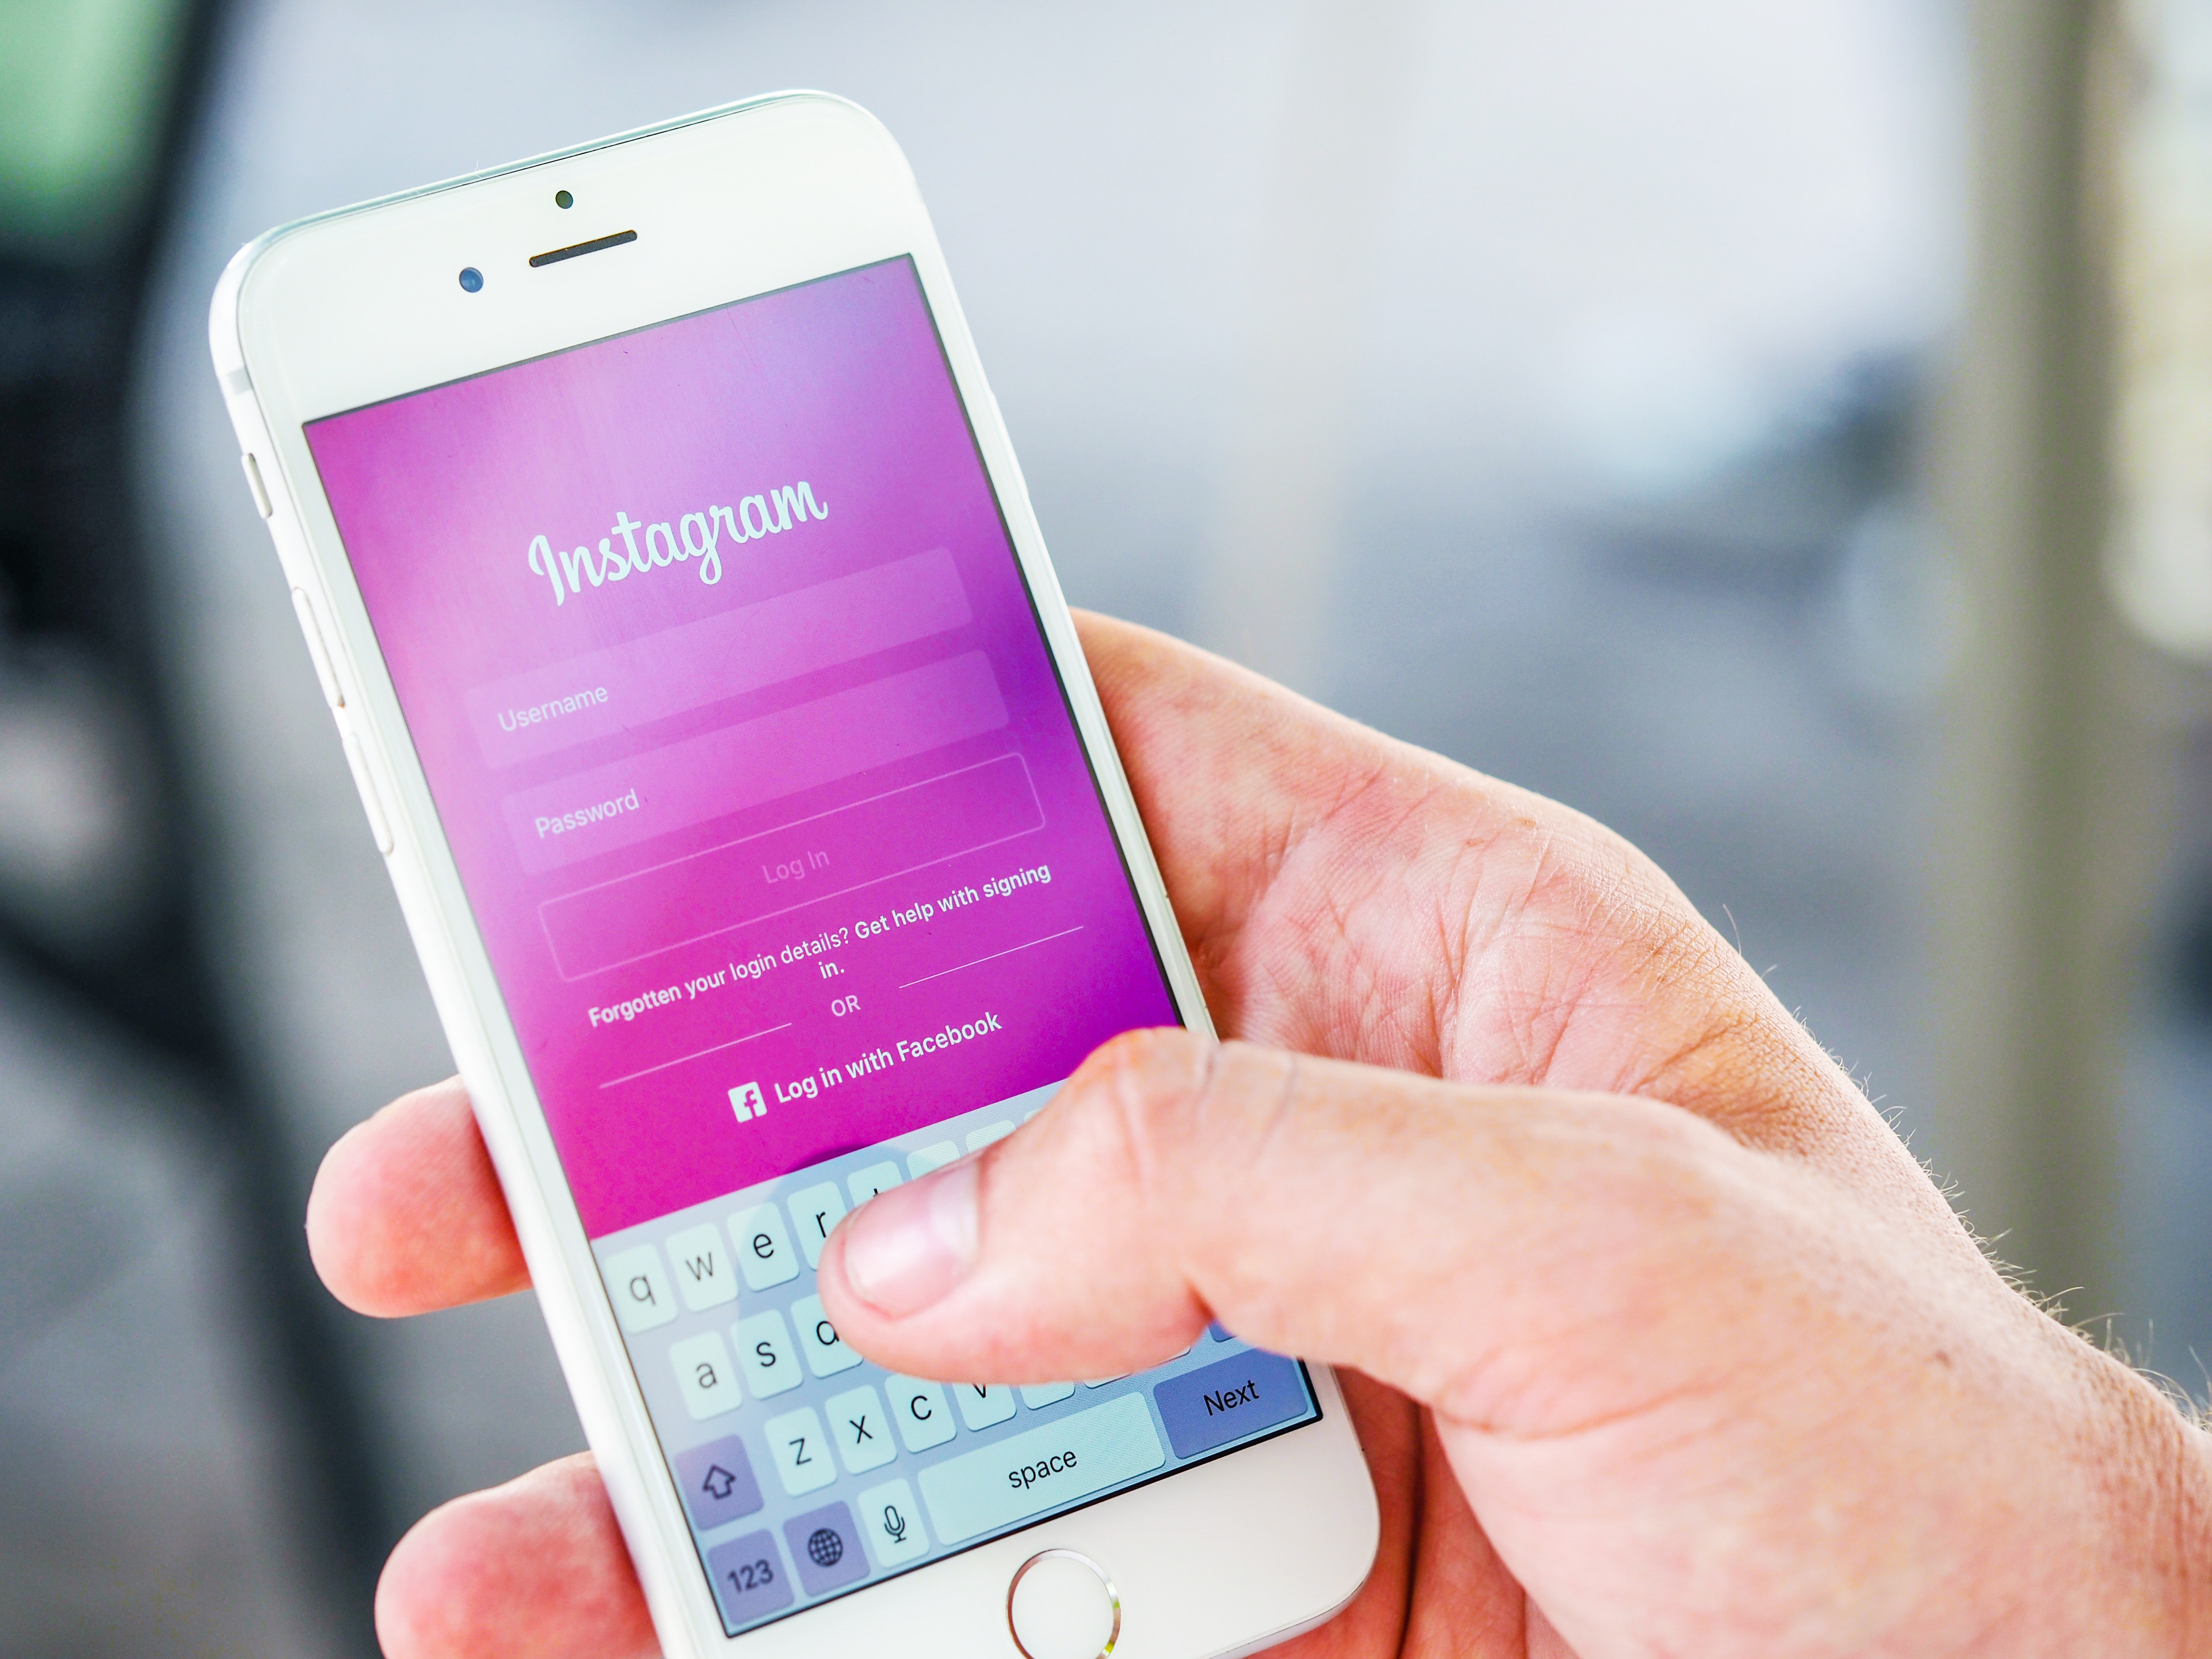 Instagram announce changes to approach on self-harm content